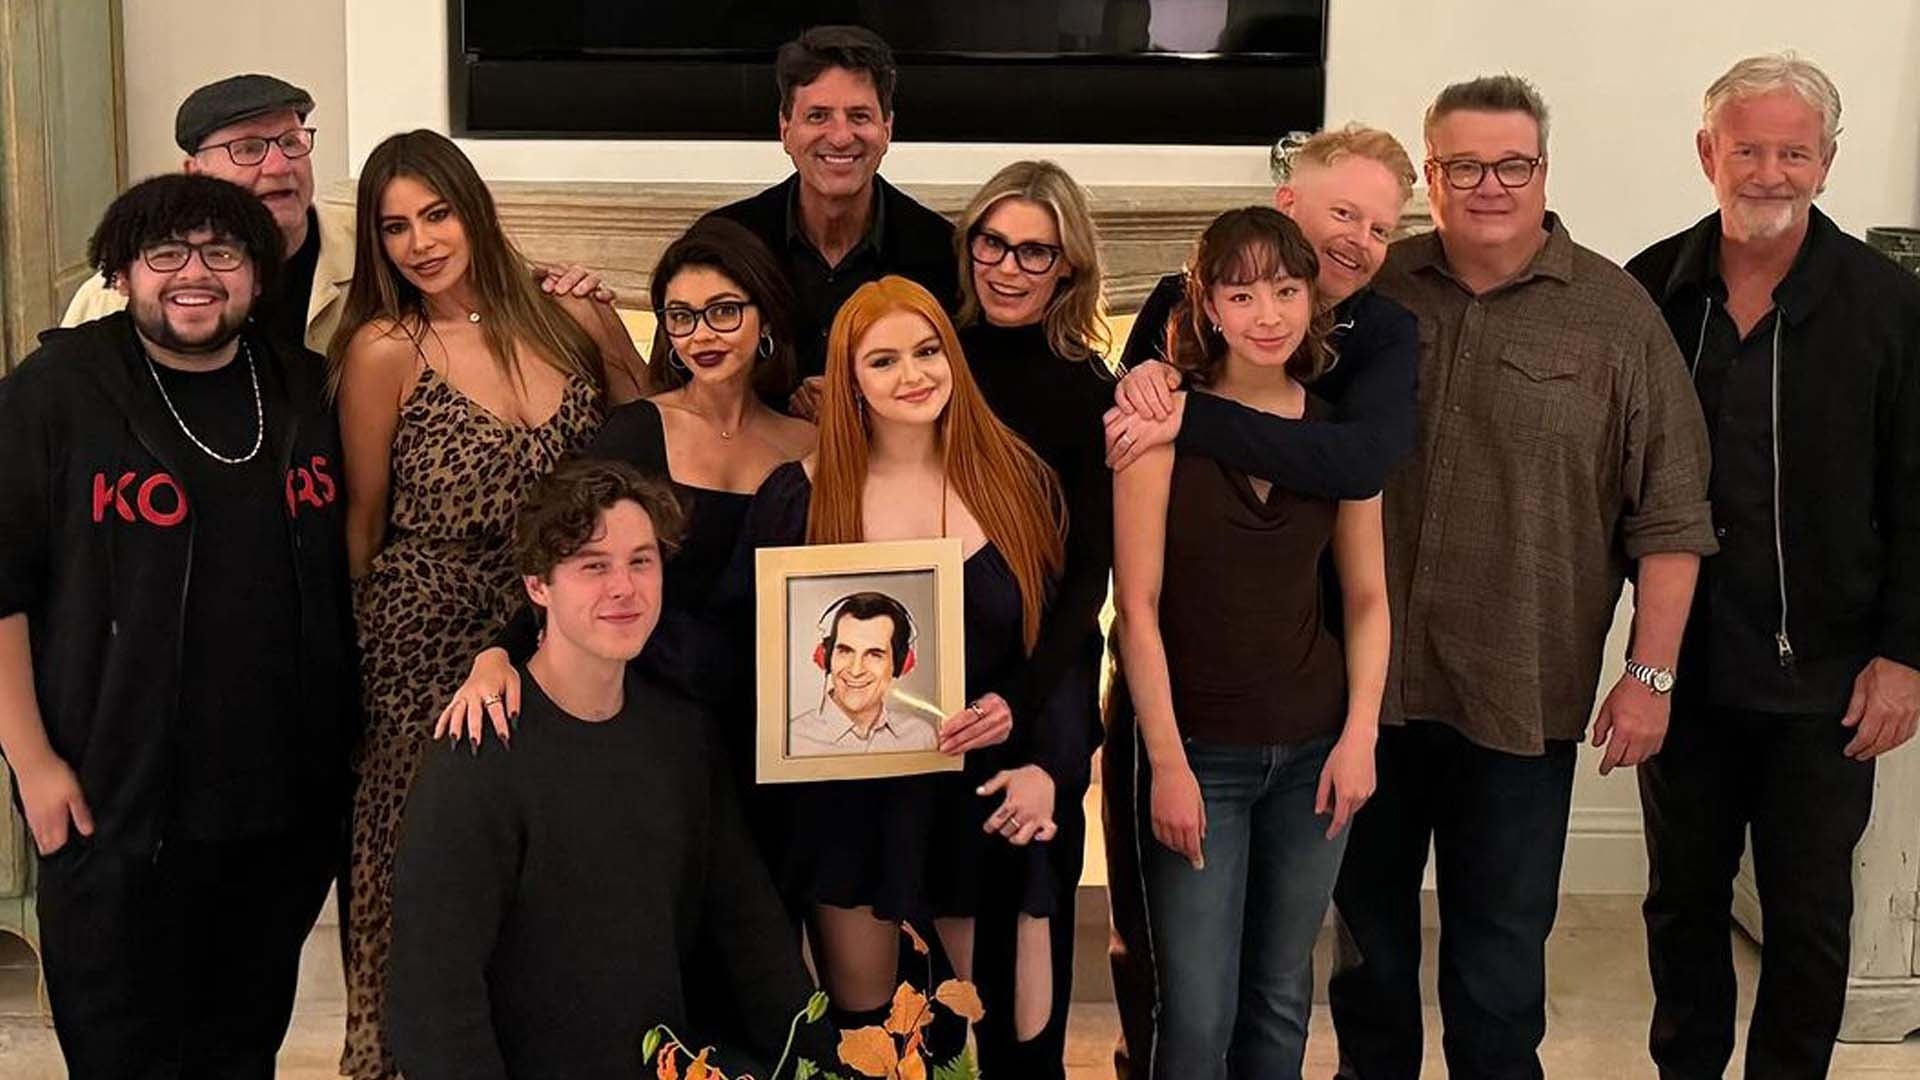 Sofia Vergara Hosts 'Modern Family' Reunion; How They Honored One Star Who Couldn't Attend